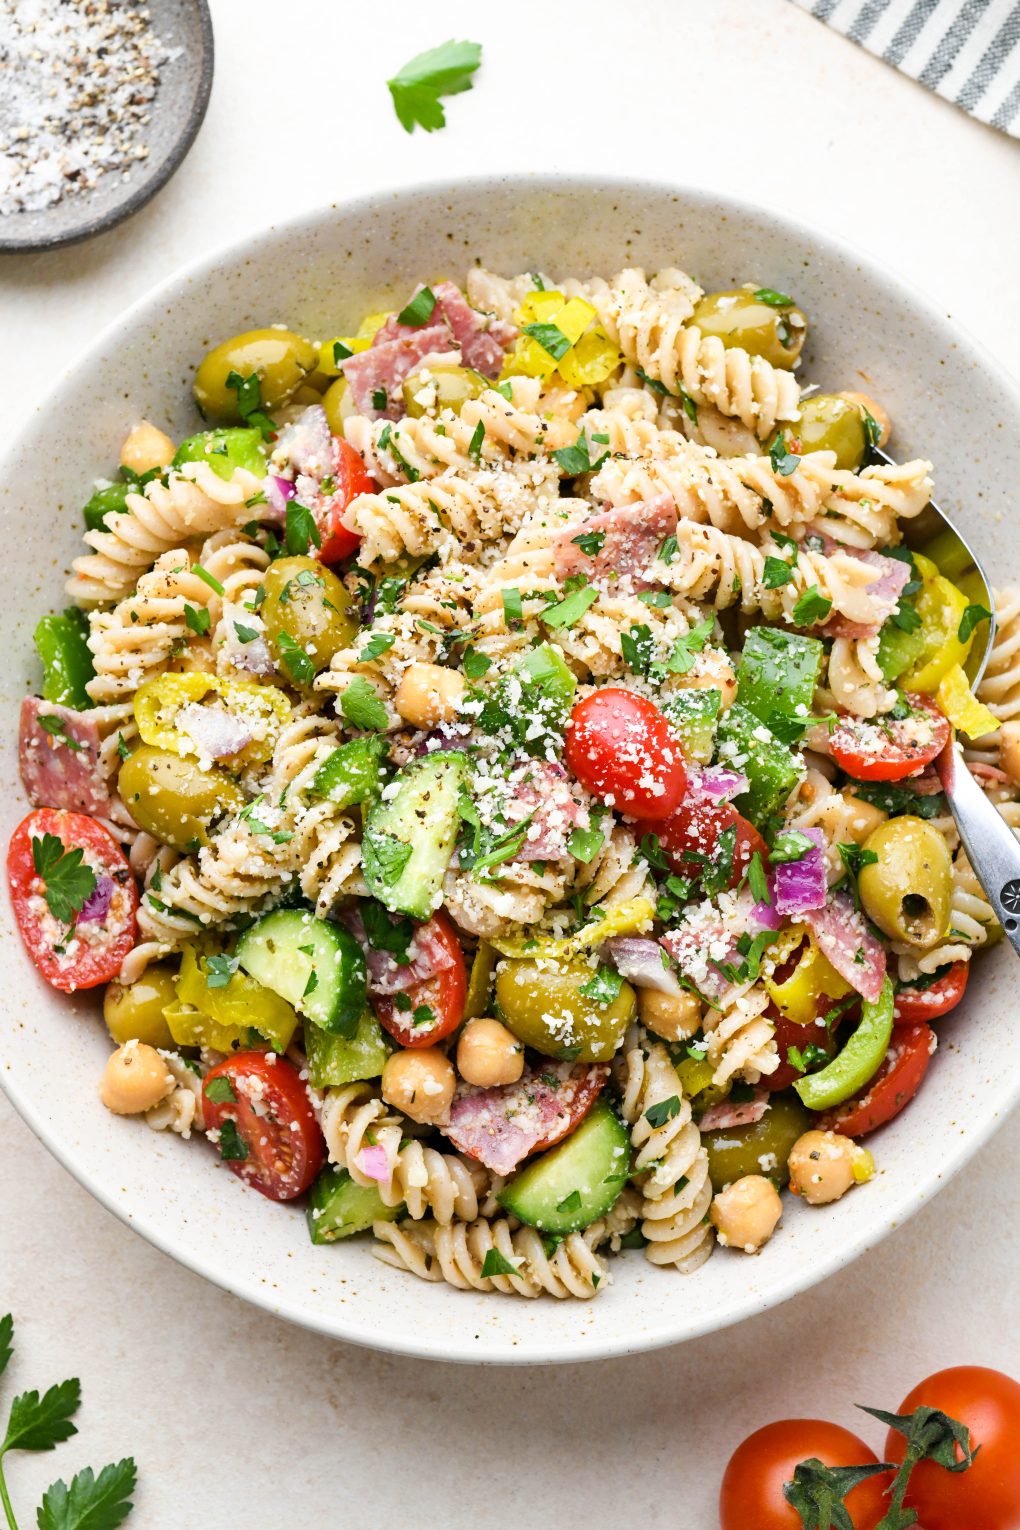 Gluten free Italian pasta salad with fresh ingredients like tomatoes, cucumbers, red onion, olives, herbs, and parmesan cheese.